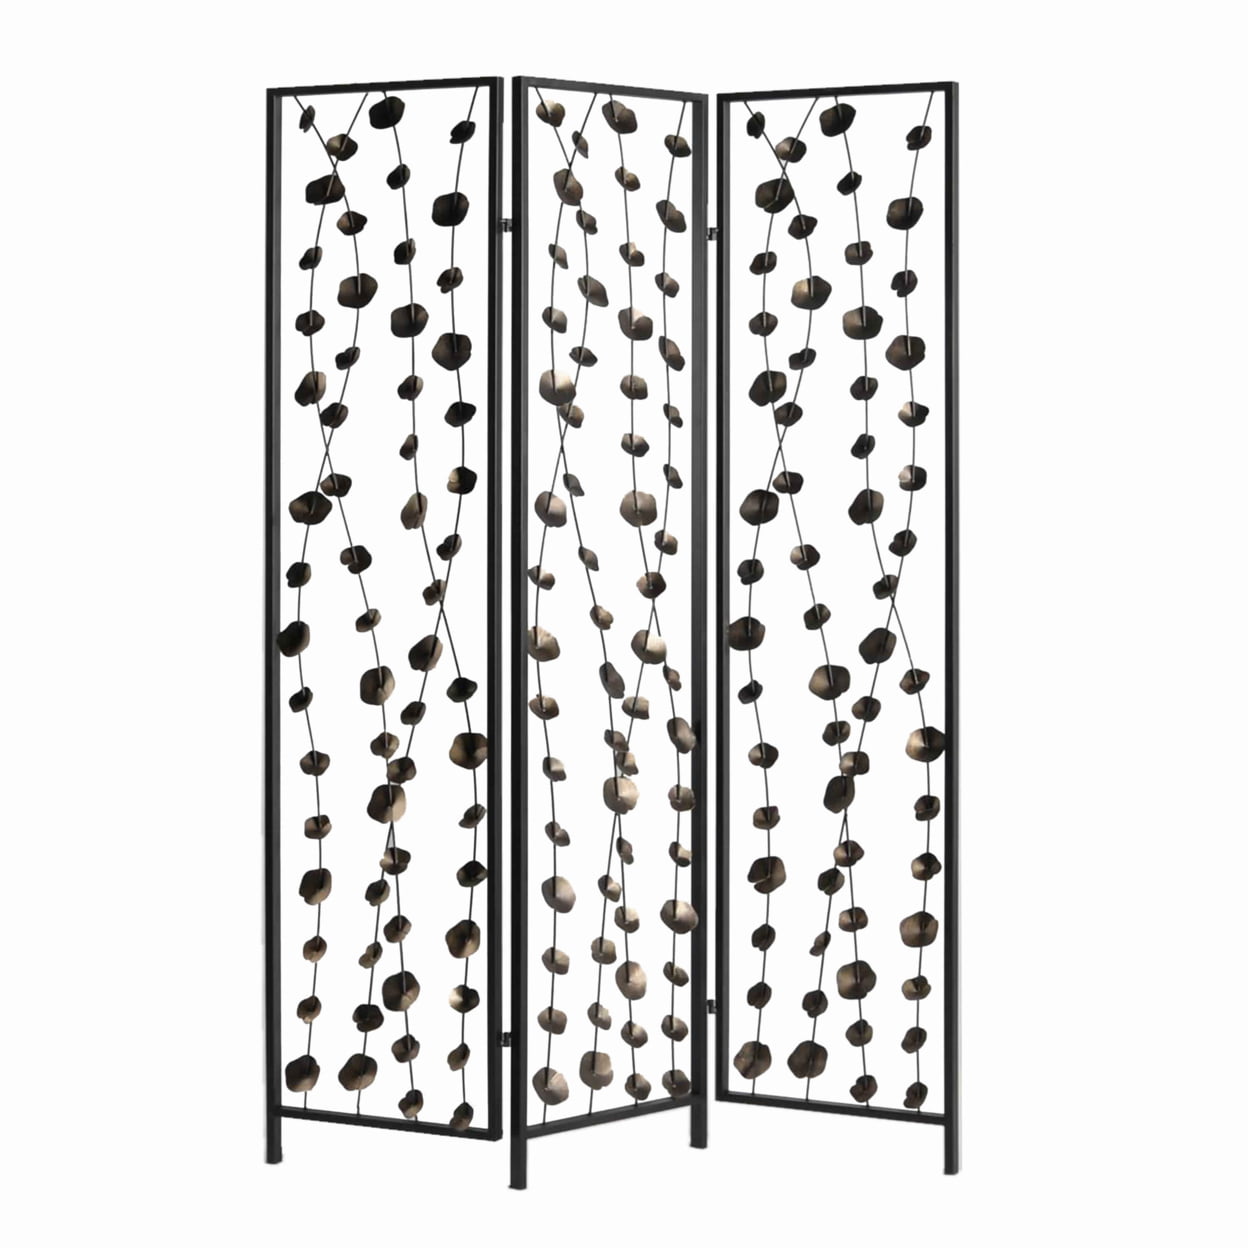 Bm205892 Transitional 3 Panel Metal Screen With Intricate Flower Design, Black